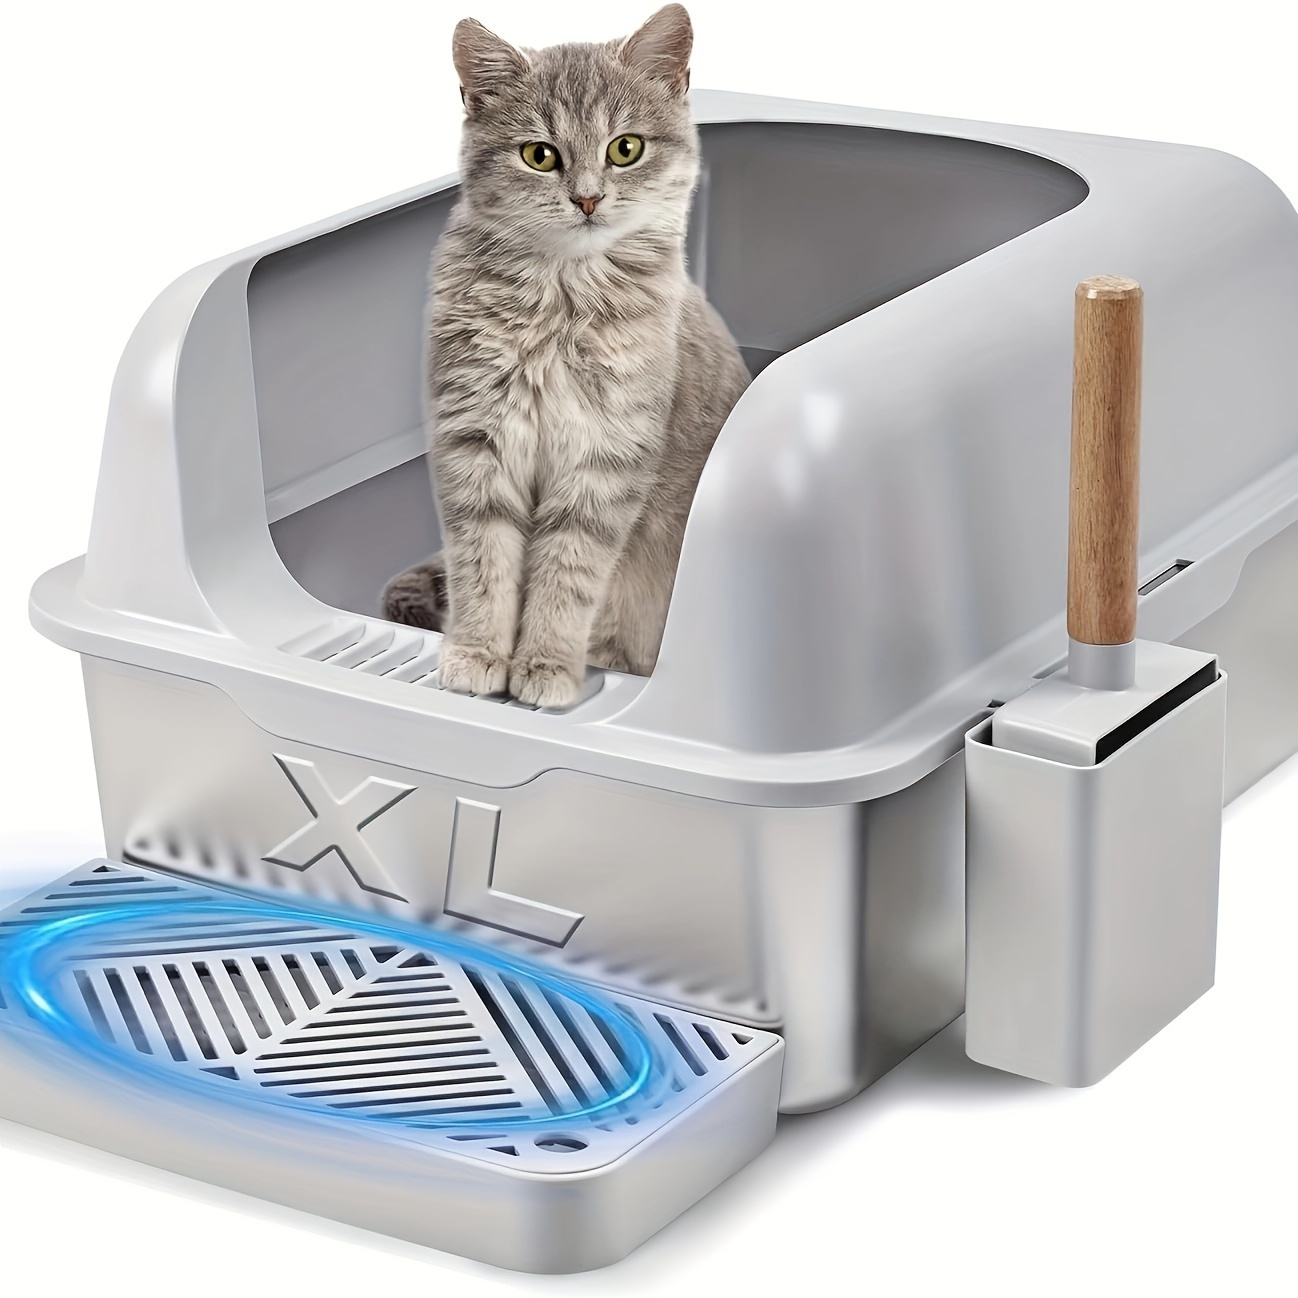 

Extra-large Stainless Steel Cat Litter Box With High Sides & Lid - Rust-resistant, Easy Clean, Includes Scoop & Mat